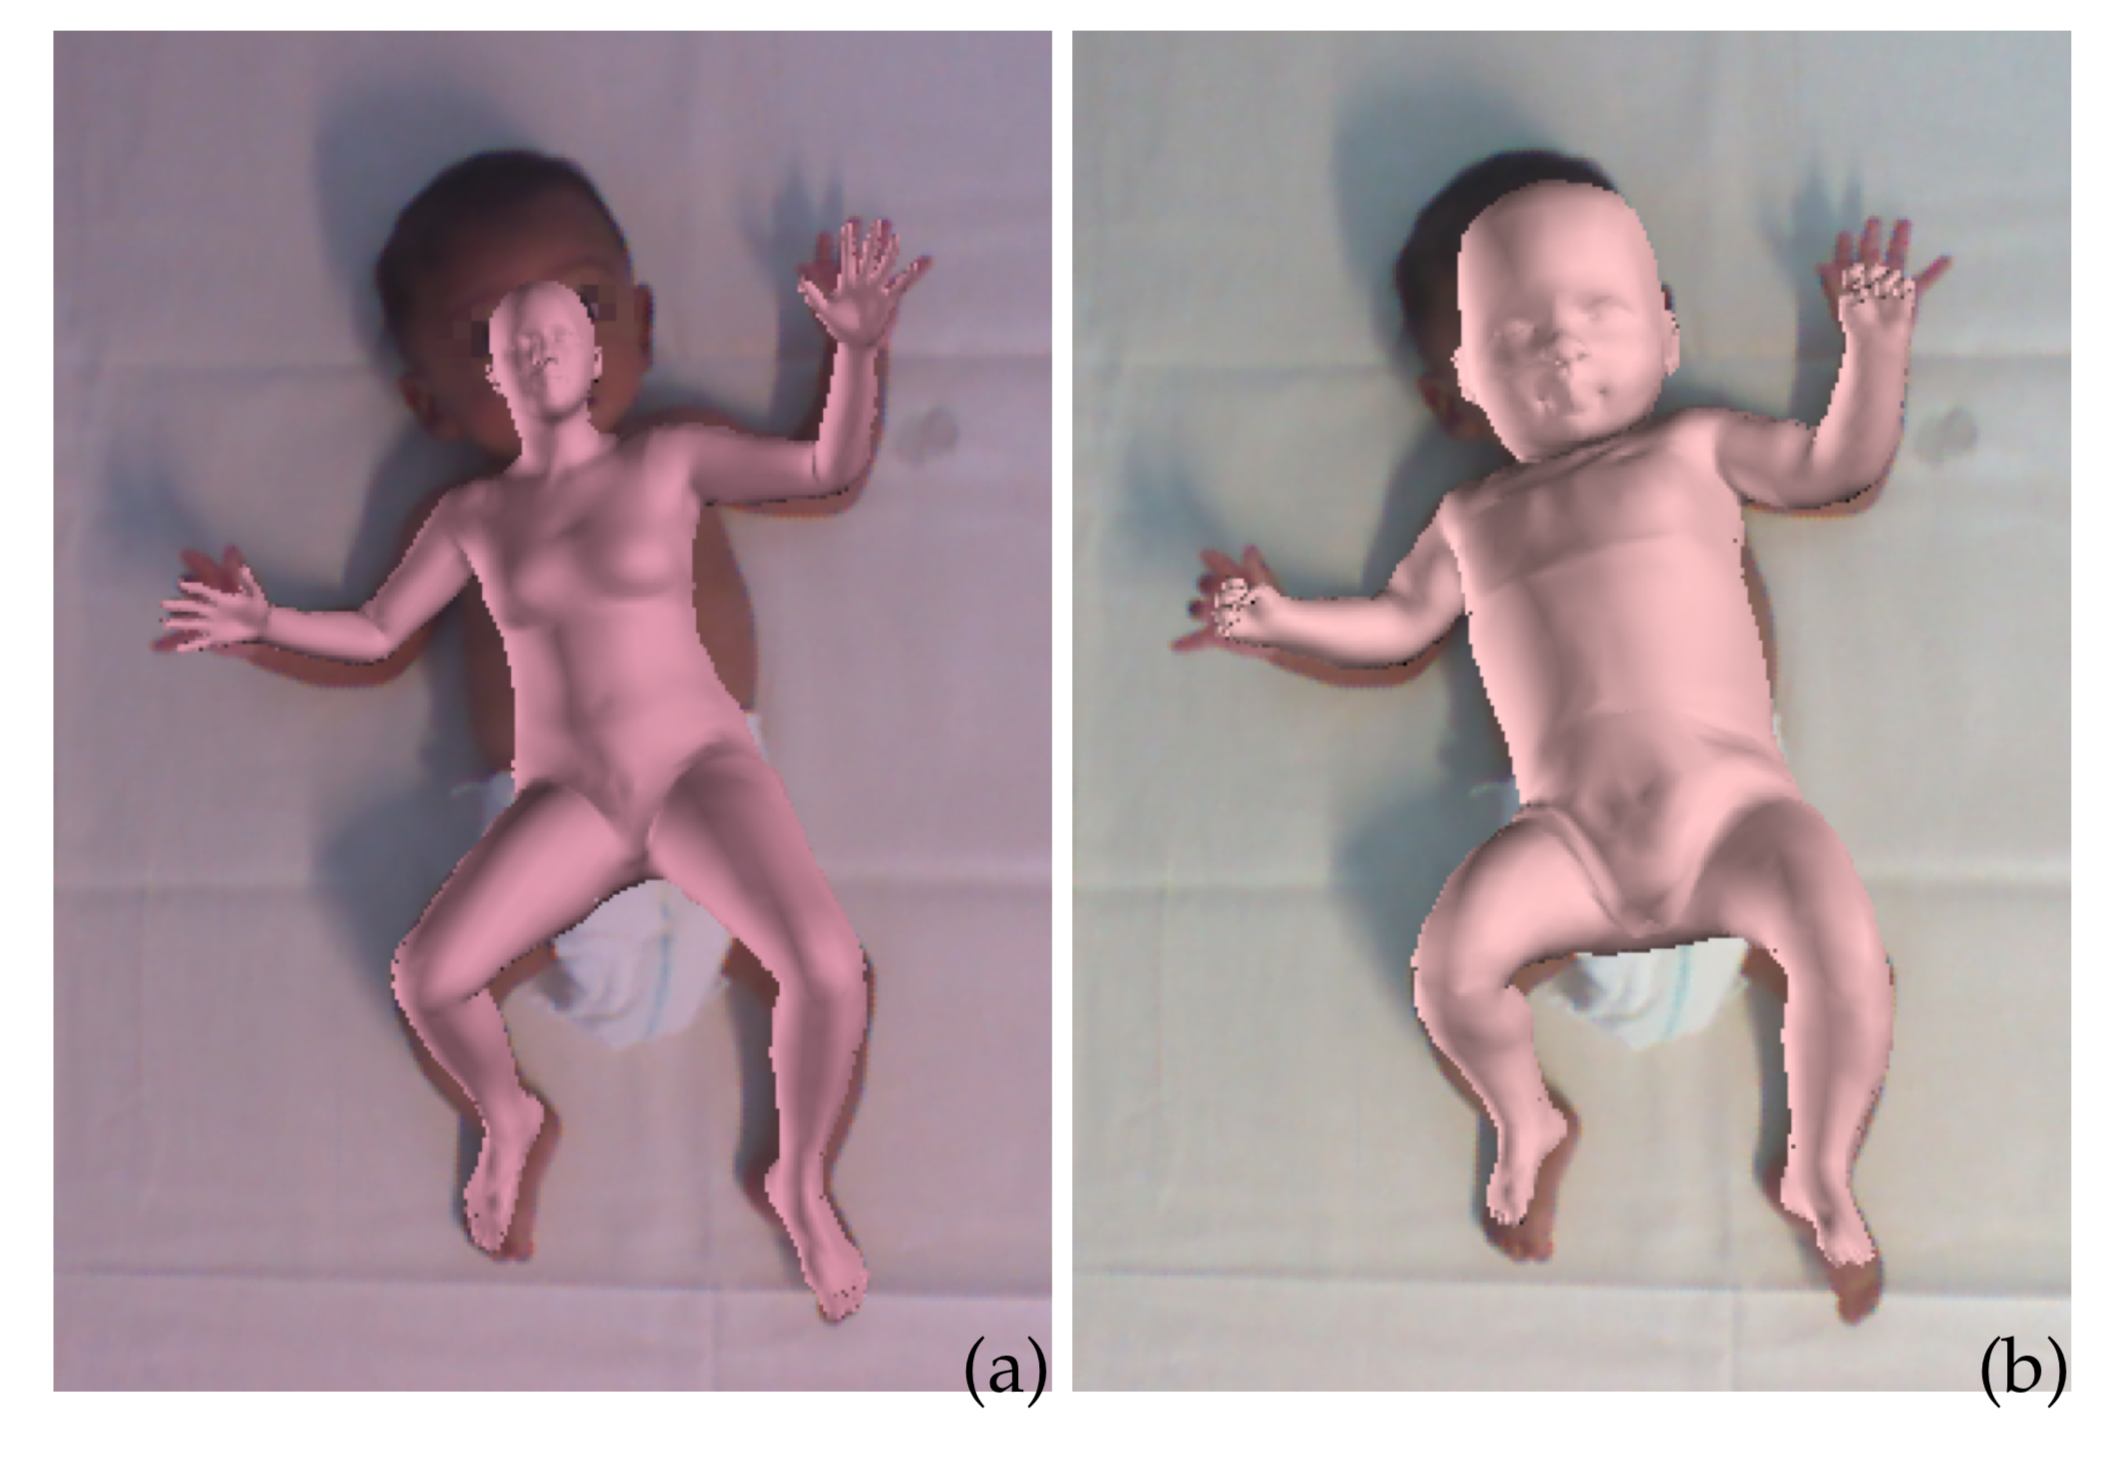 (a) Simply scaling a generic adult body model and fitting it to an infant does not work as body proportions significantly differ. (b) The proposed SMIL model properly captures the infants’ shape and pose